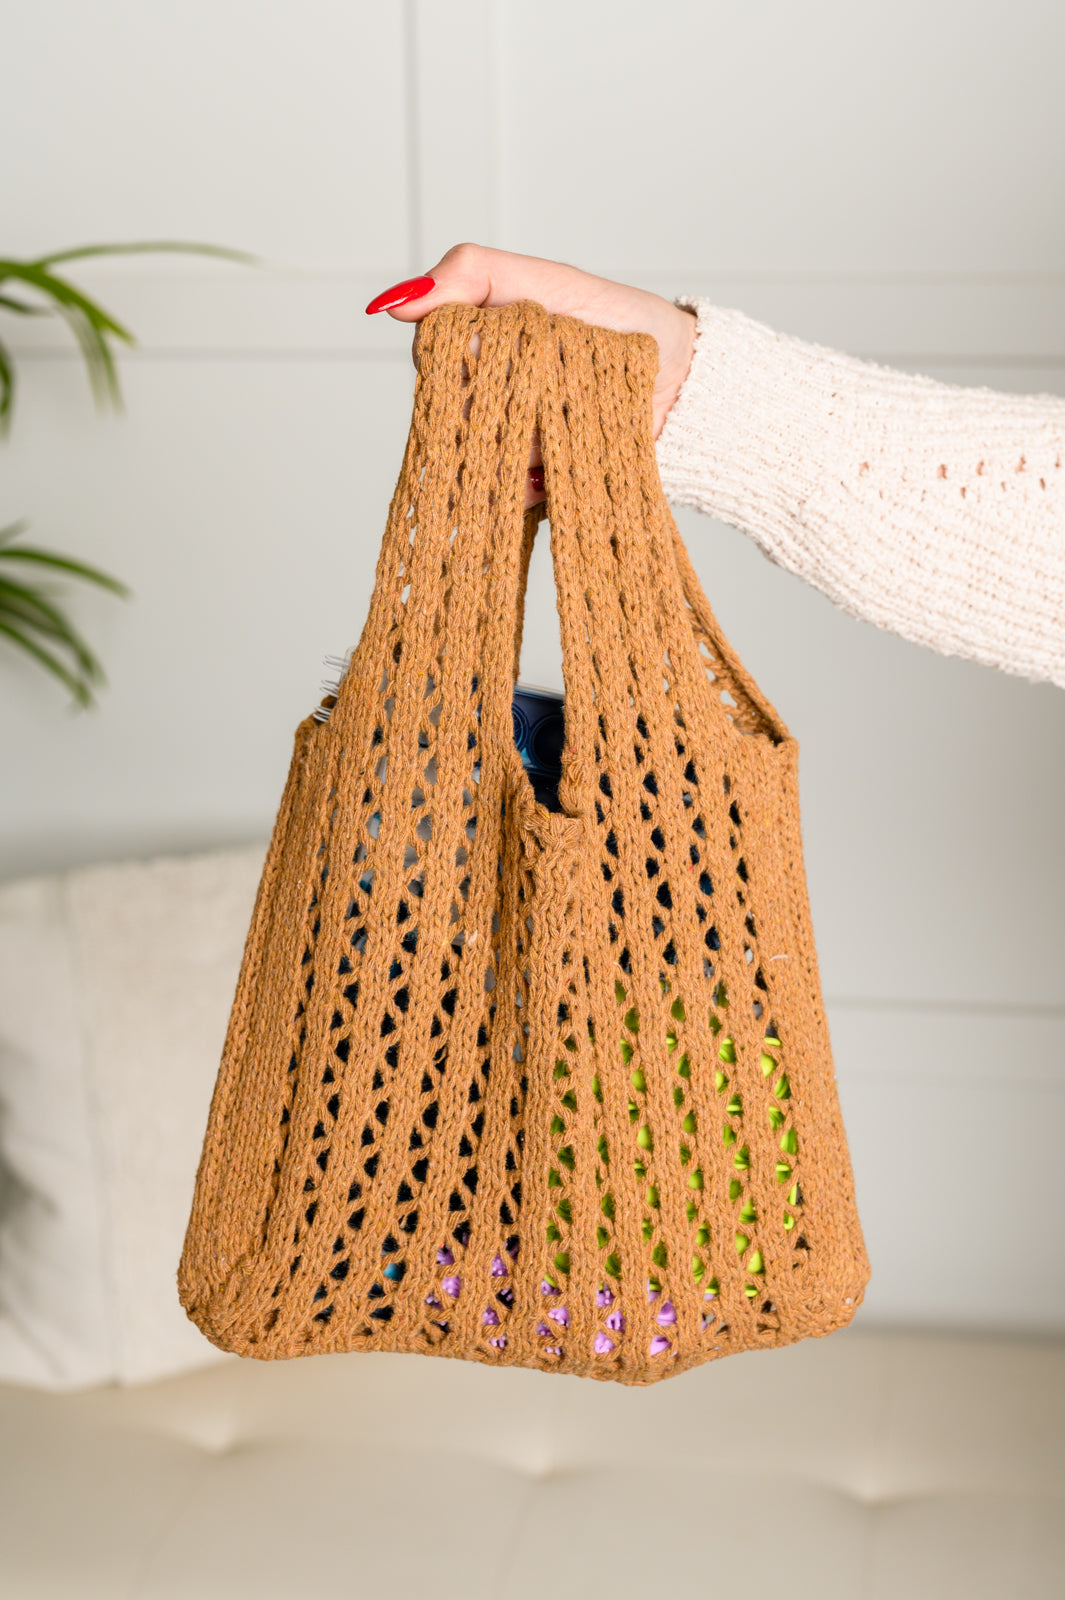 Girls Day Open Weave Bag in Tan Ave Shops